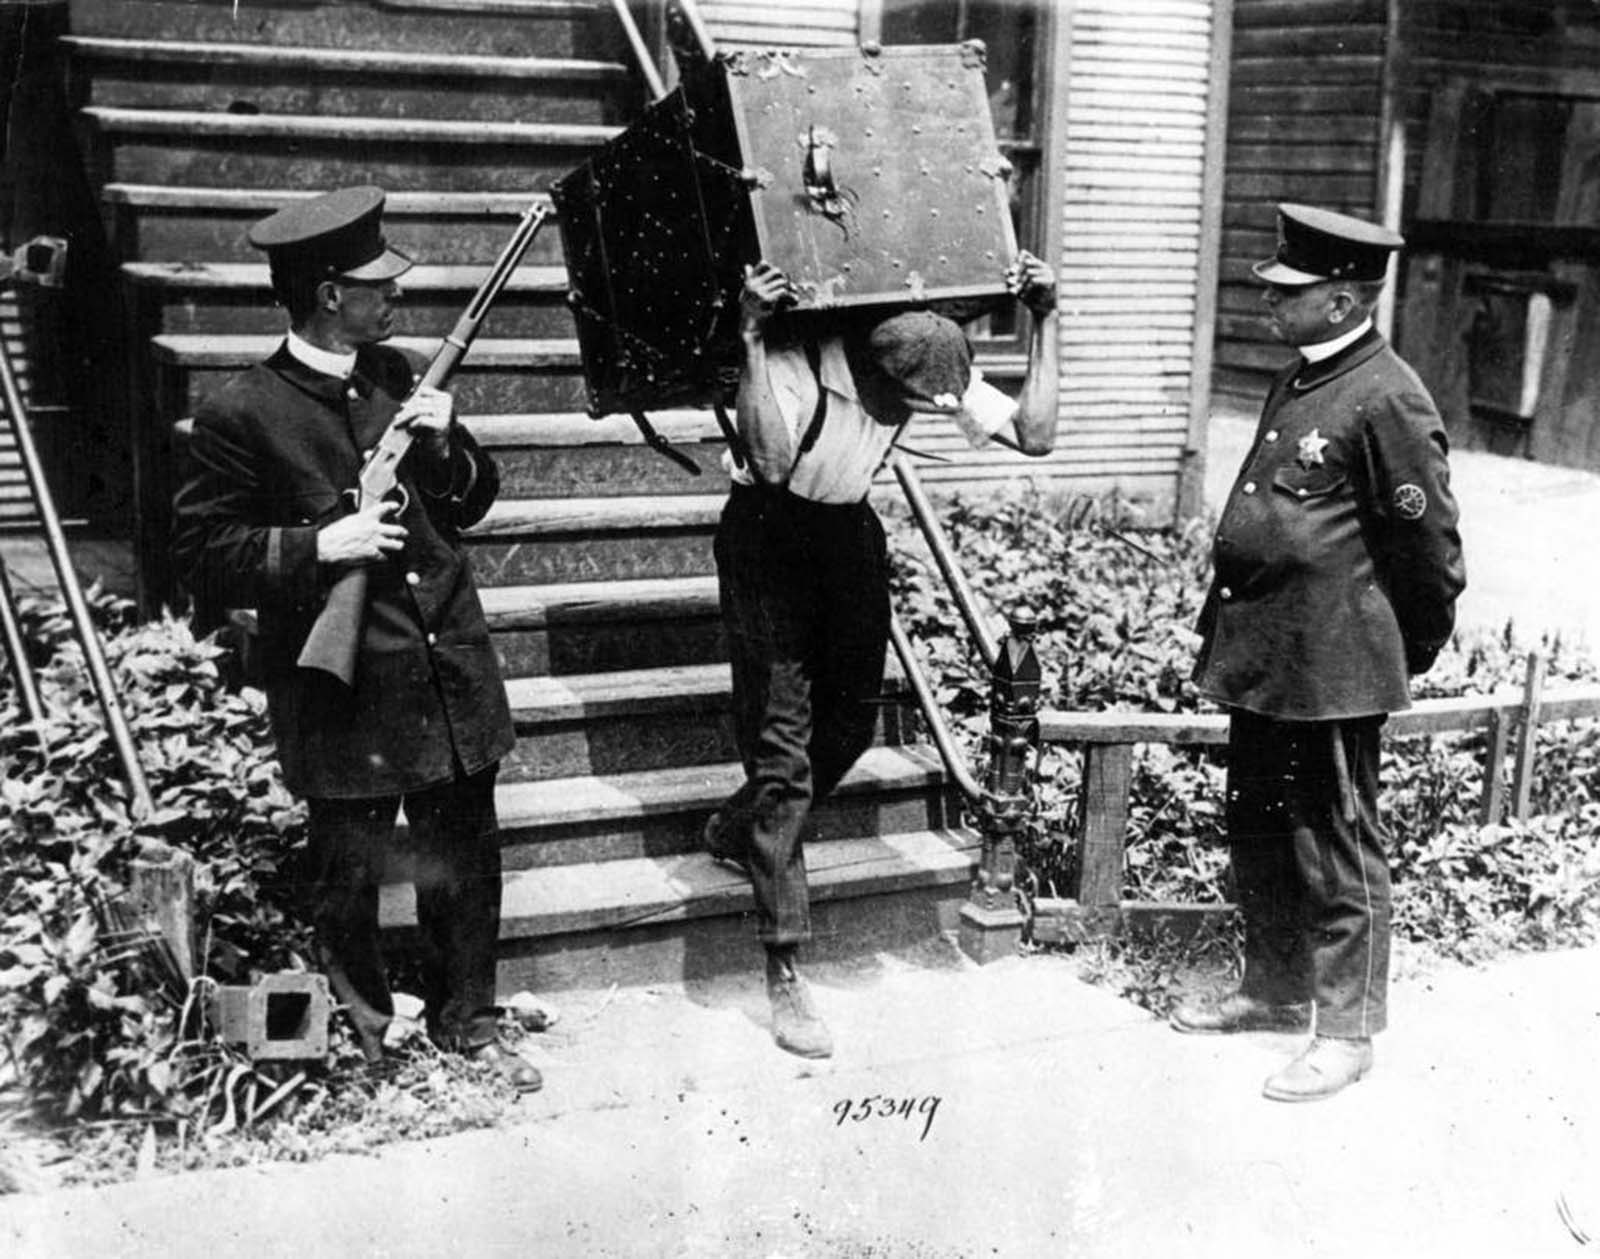 A black resident of the south side moves his belongings to a safety zone under police protection during the Chicago race riots of 1919